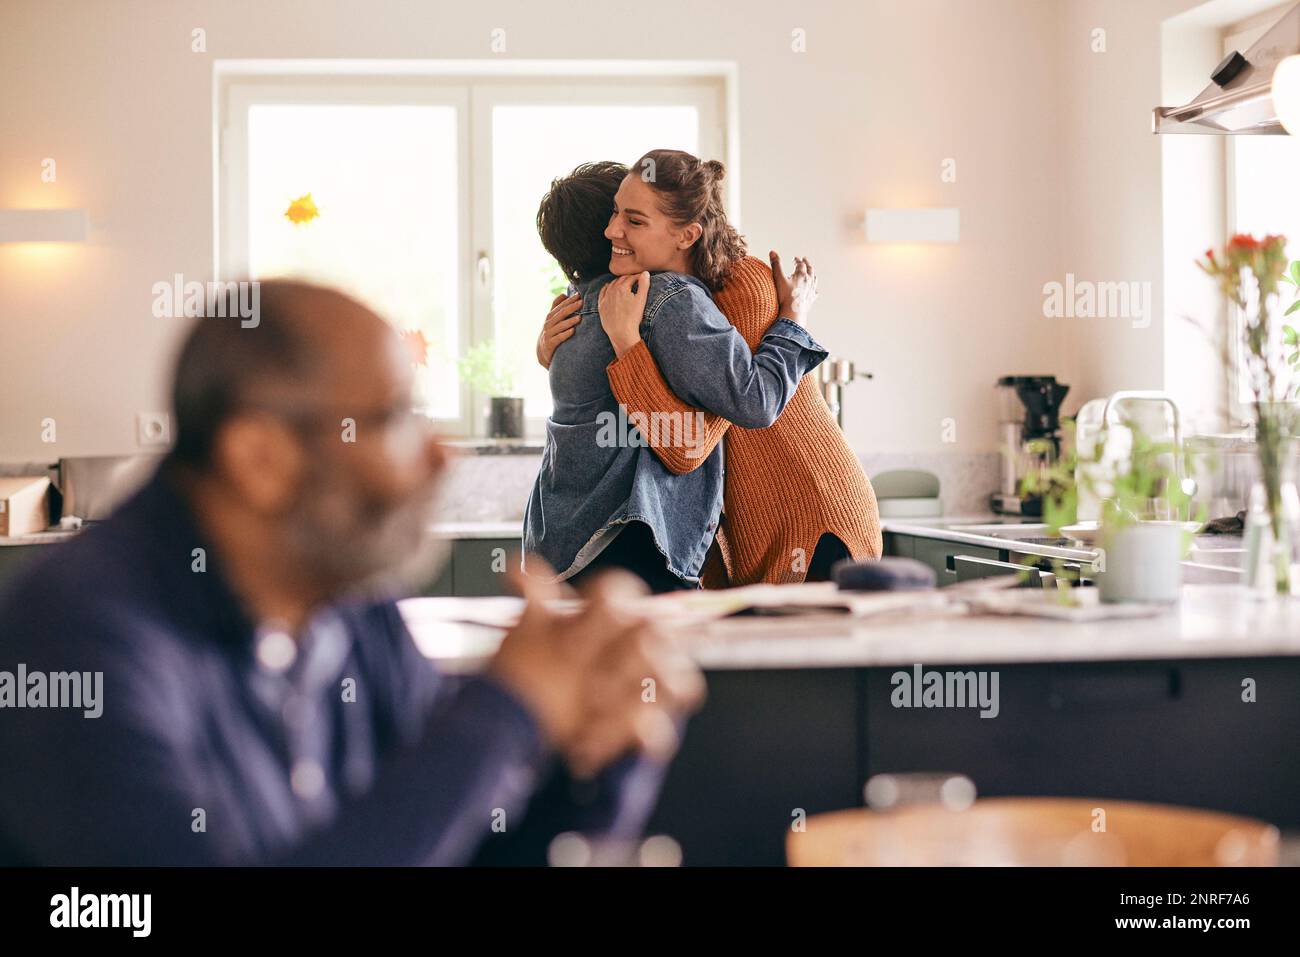 Smiling woman embracing mother-in-law while standing in kitchen at home Stock Photo